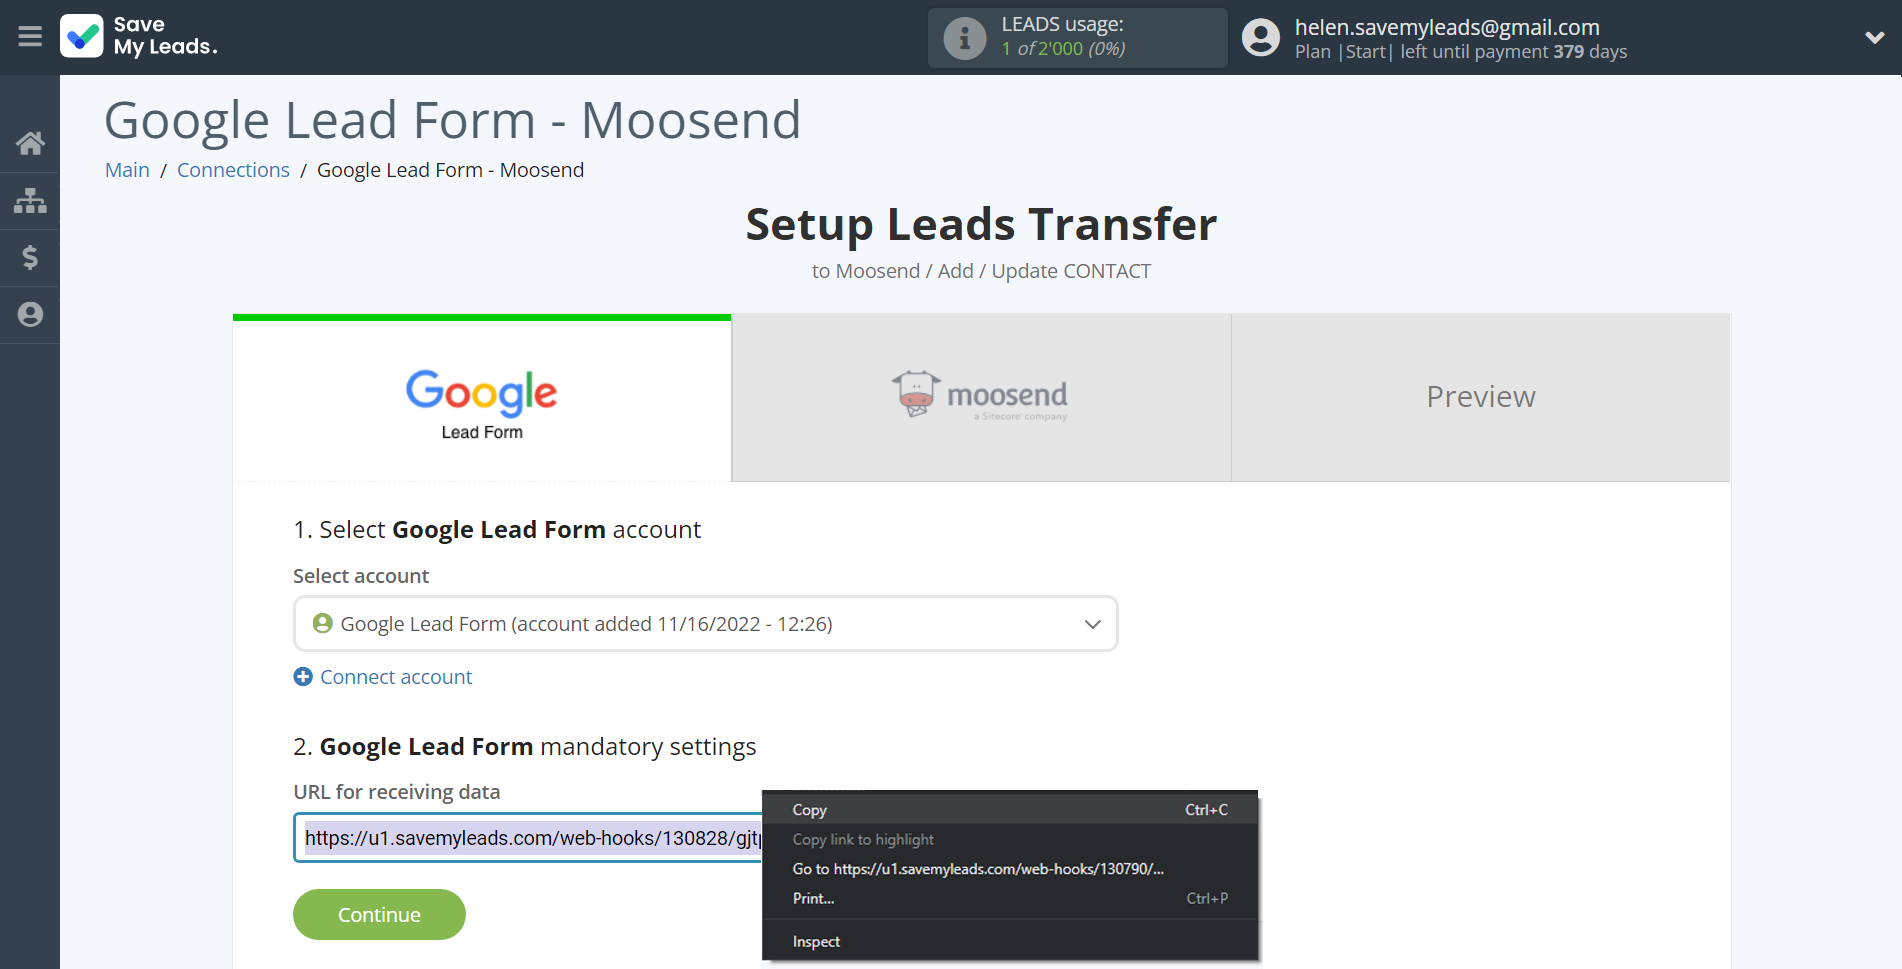 How to Connect Google Lead Form with Moosend | Data Source account connection